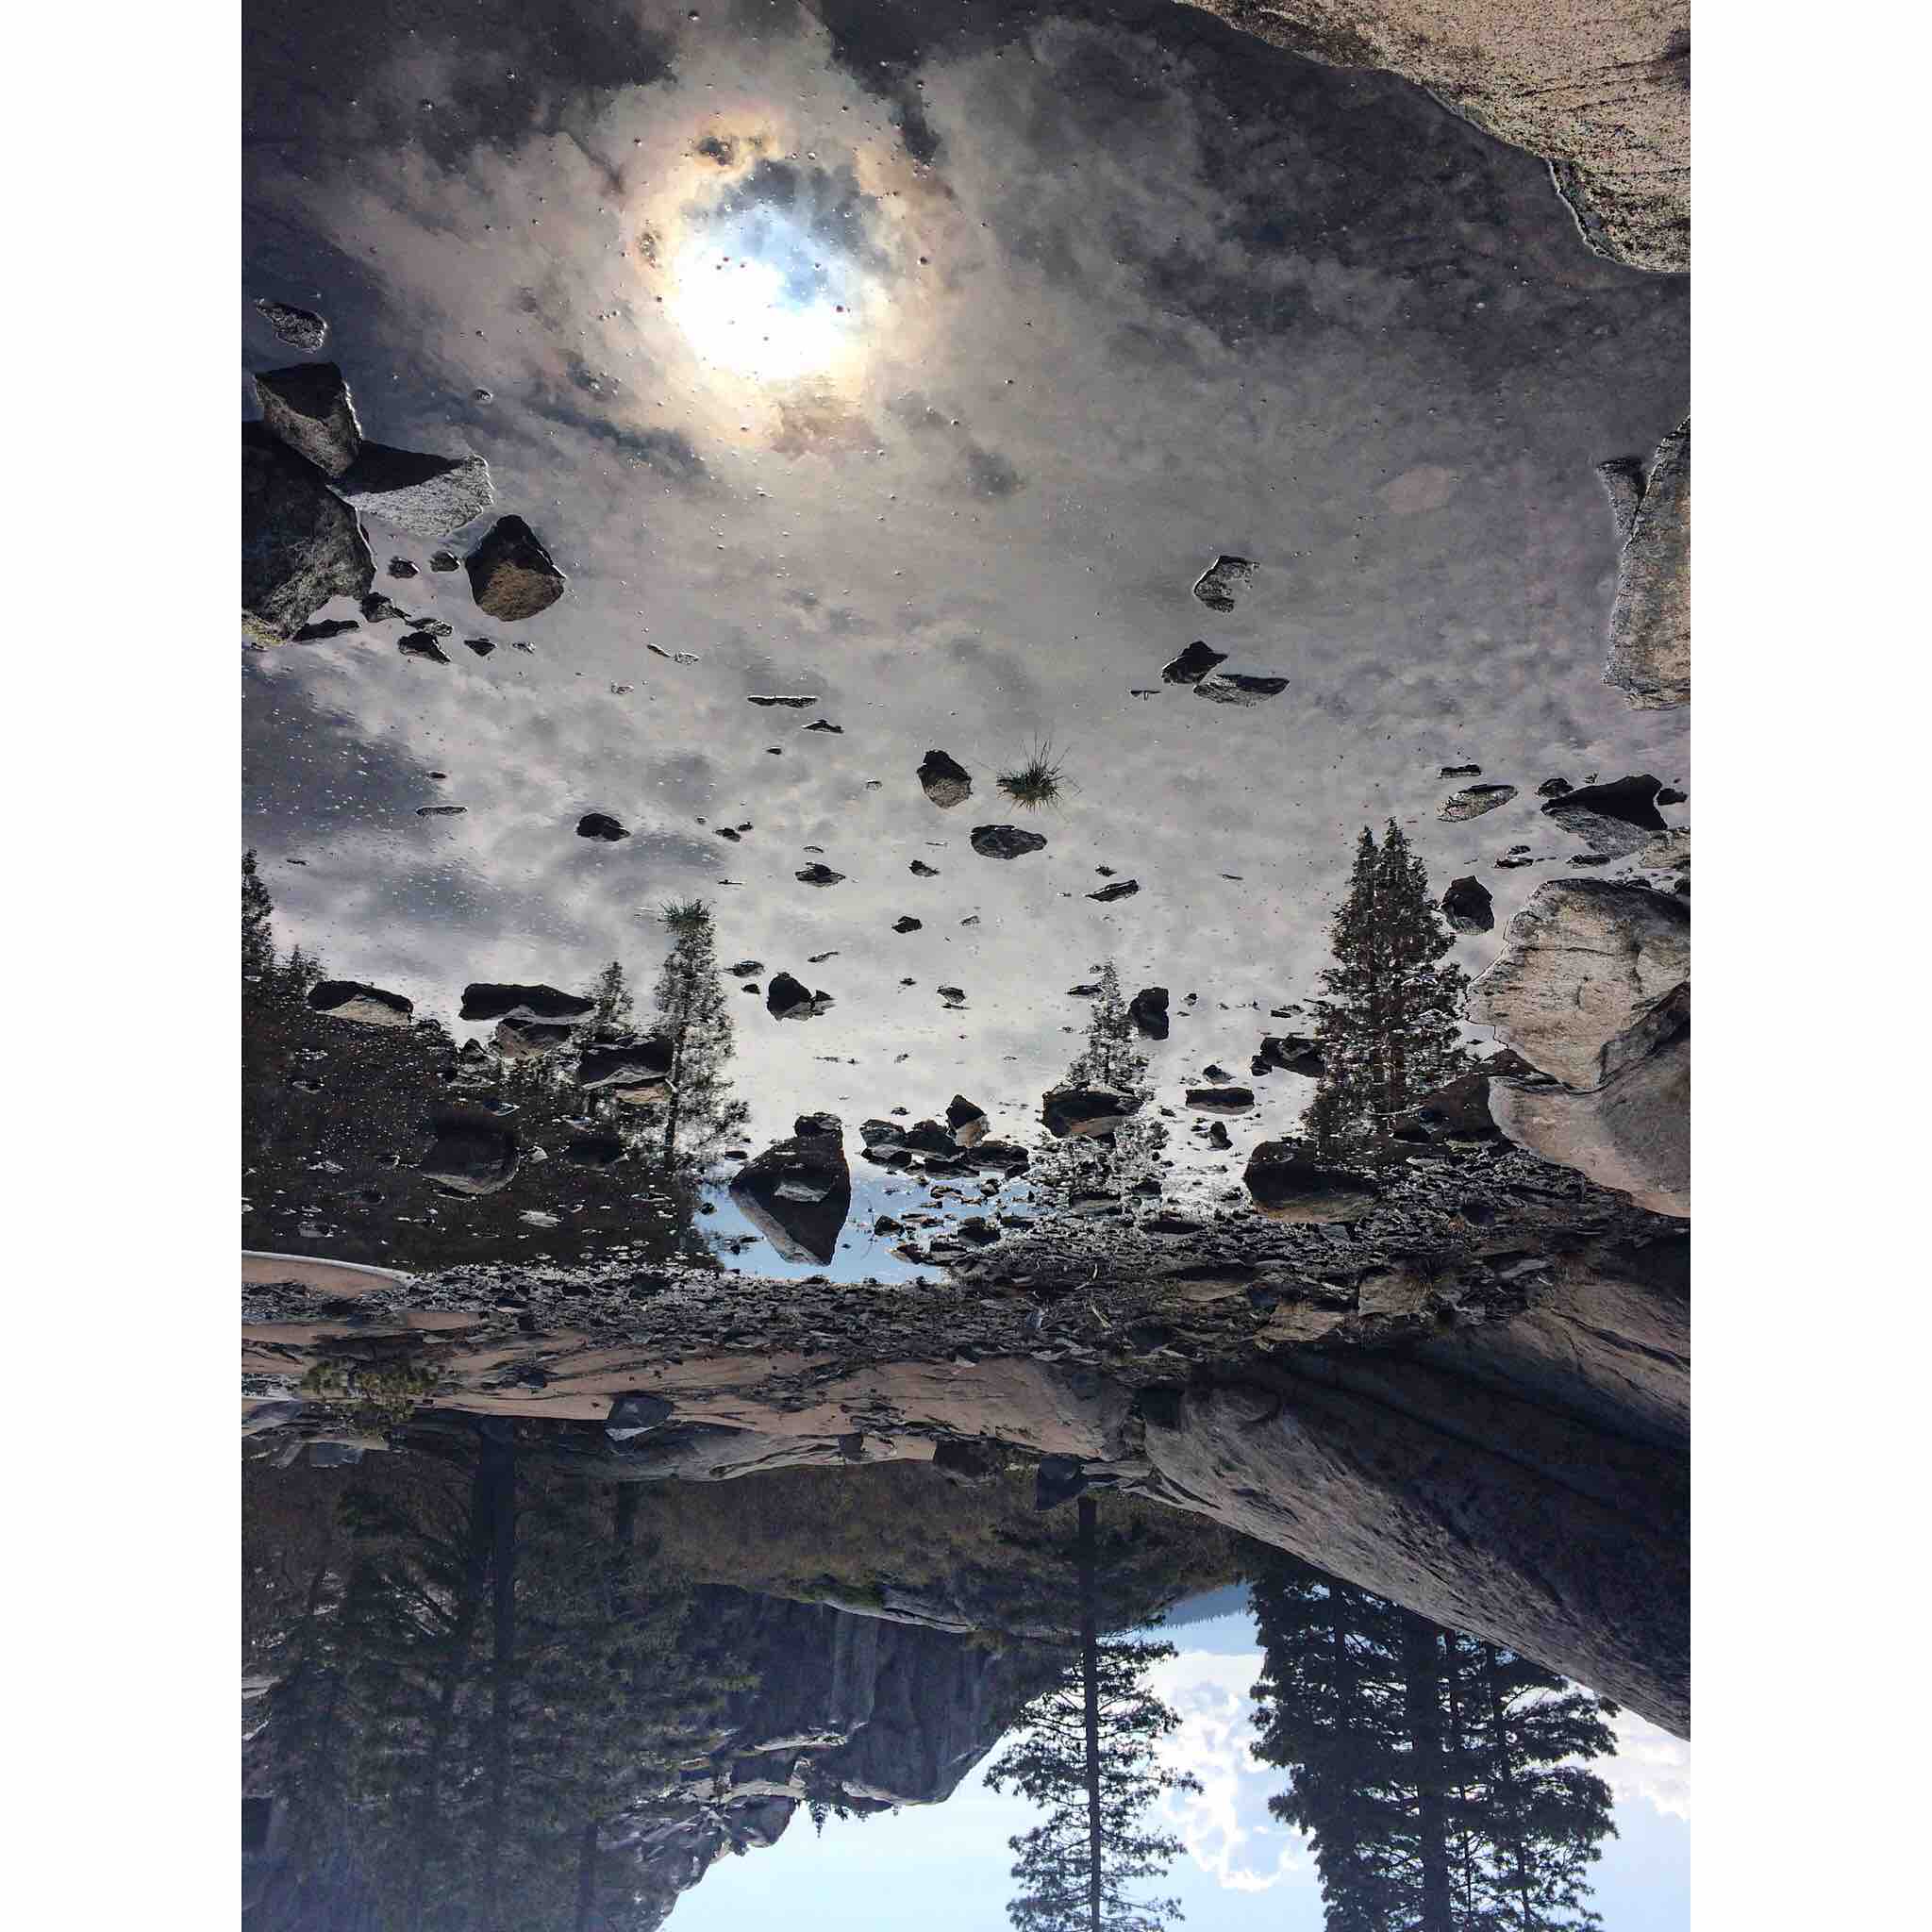 I turned this picture I took of a mirrored puddle upside down and it looks like some crazy cool alien planet